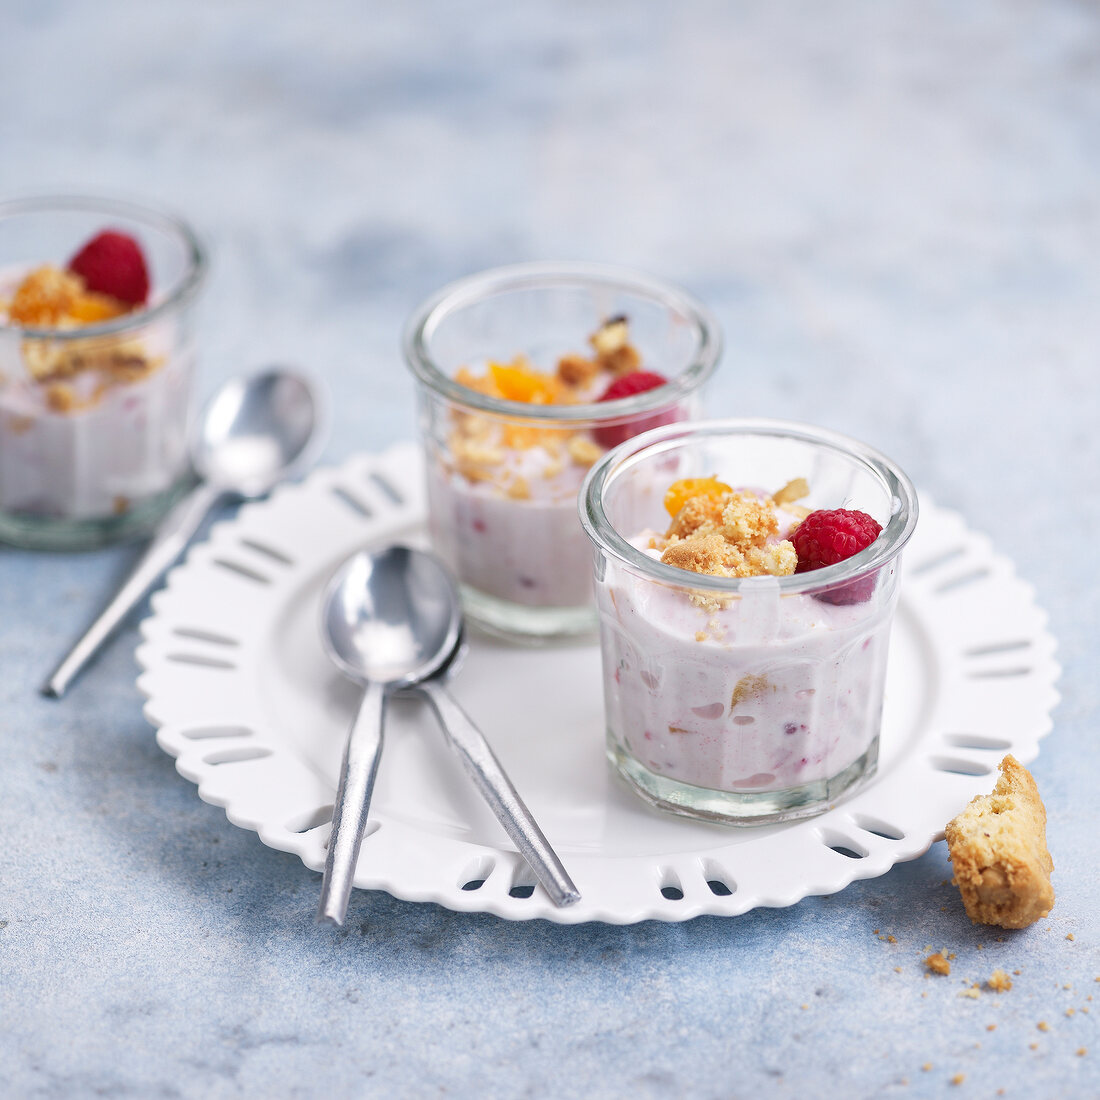 Whipped ricotta with apricots, raspberries and crushed cookies